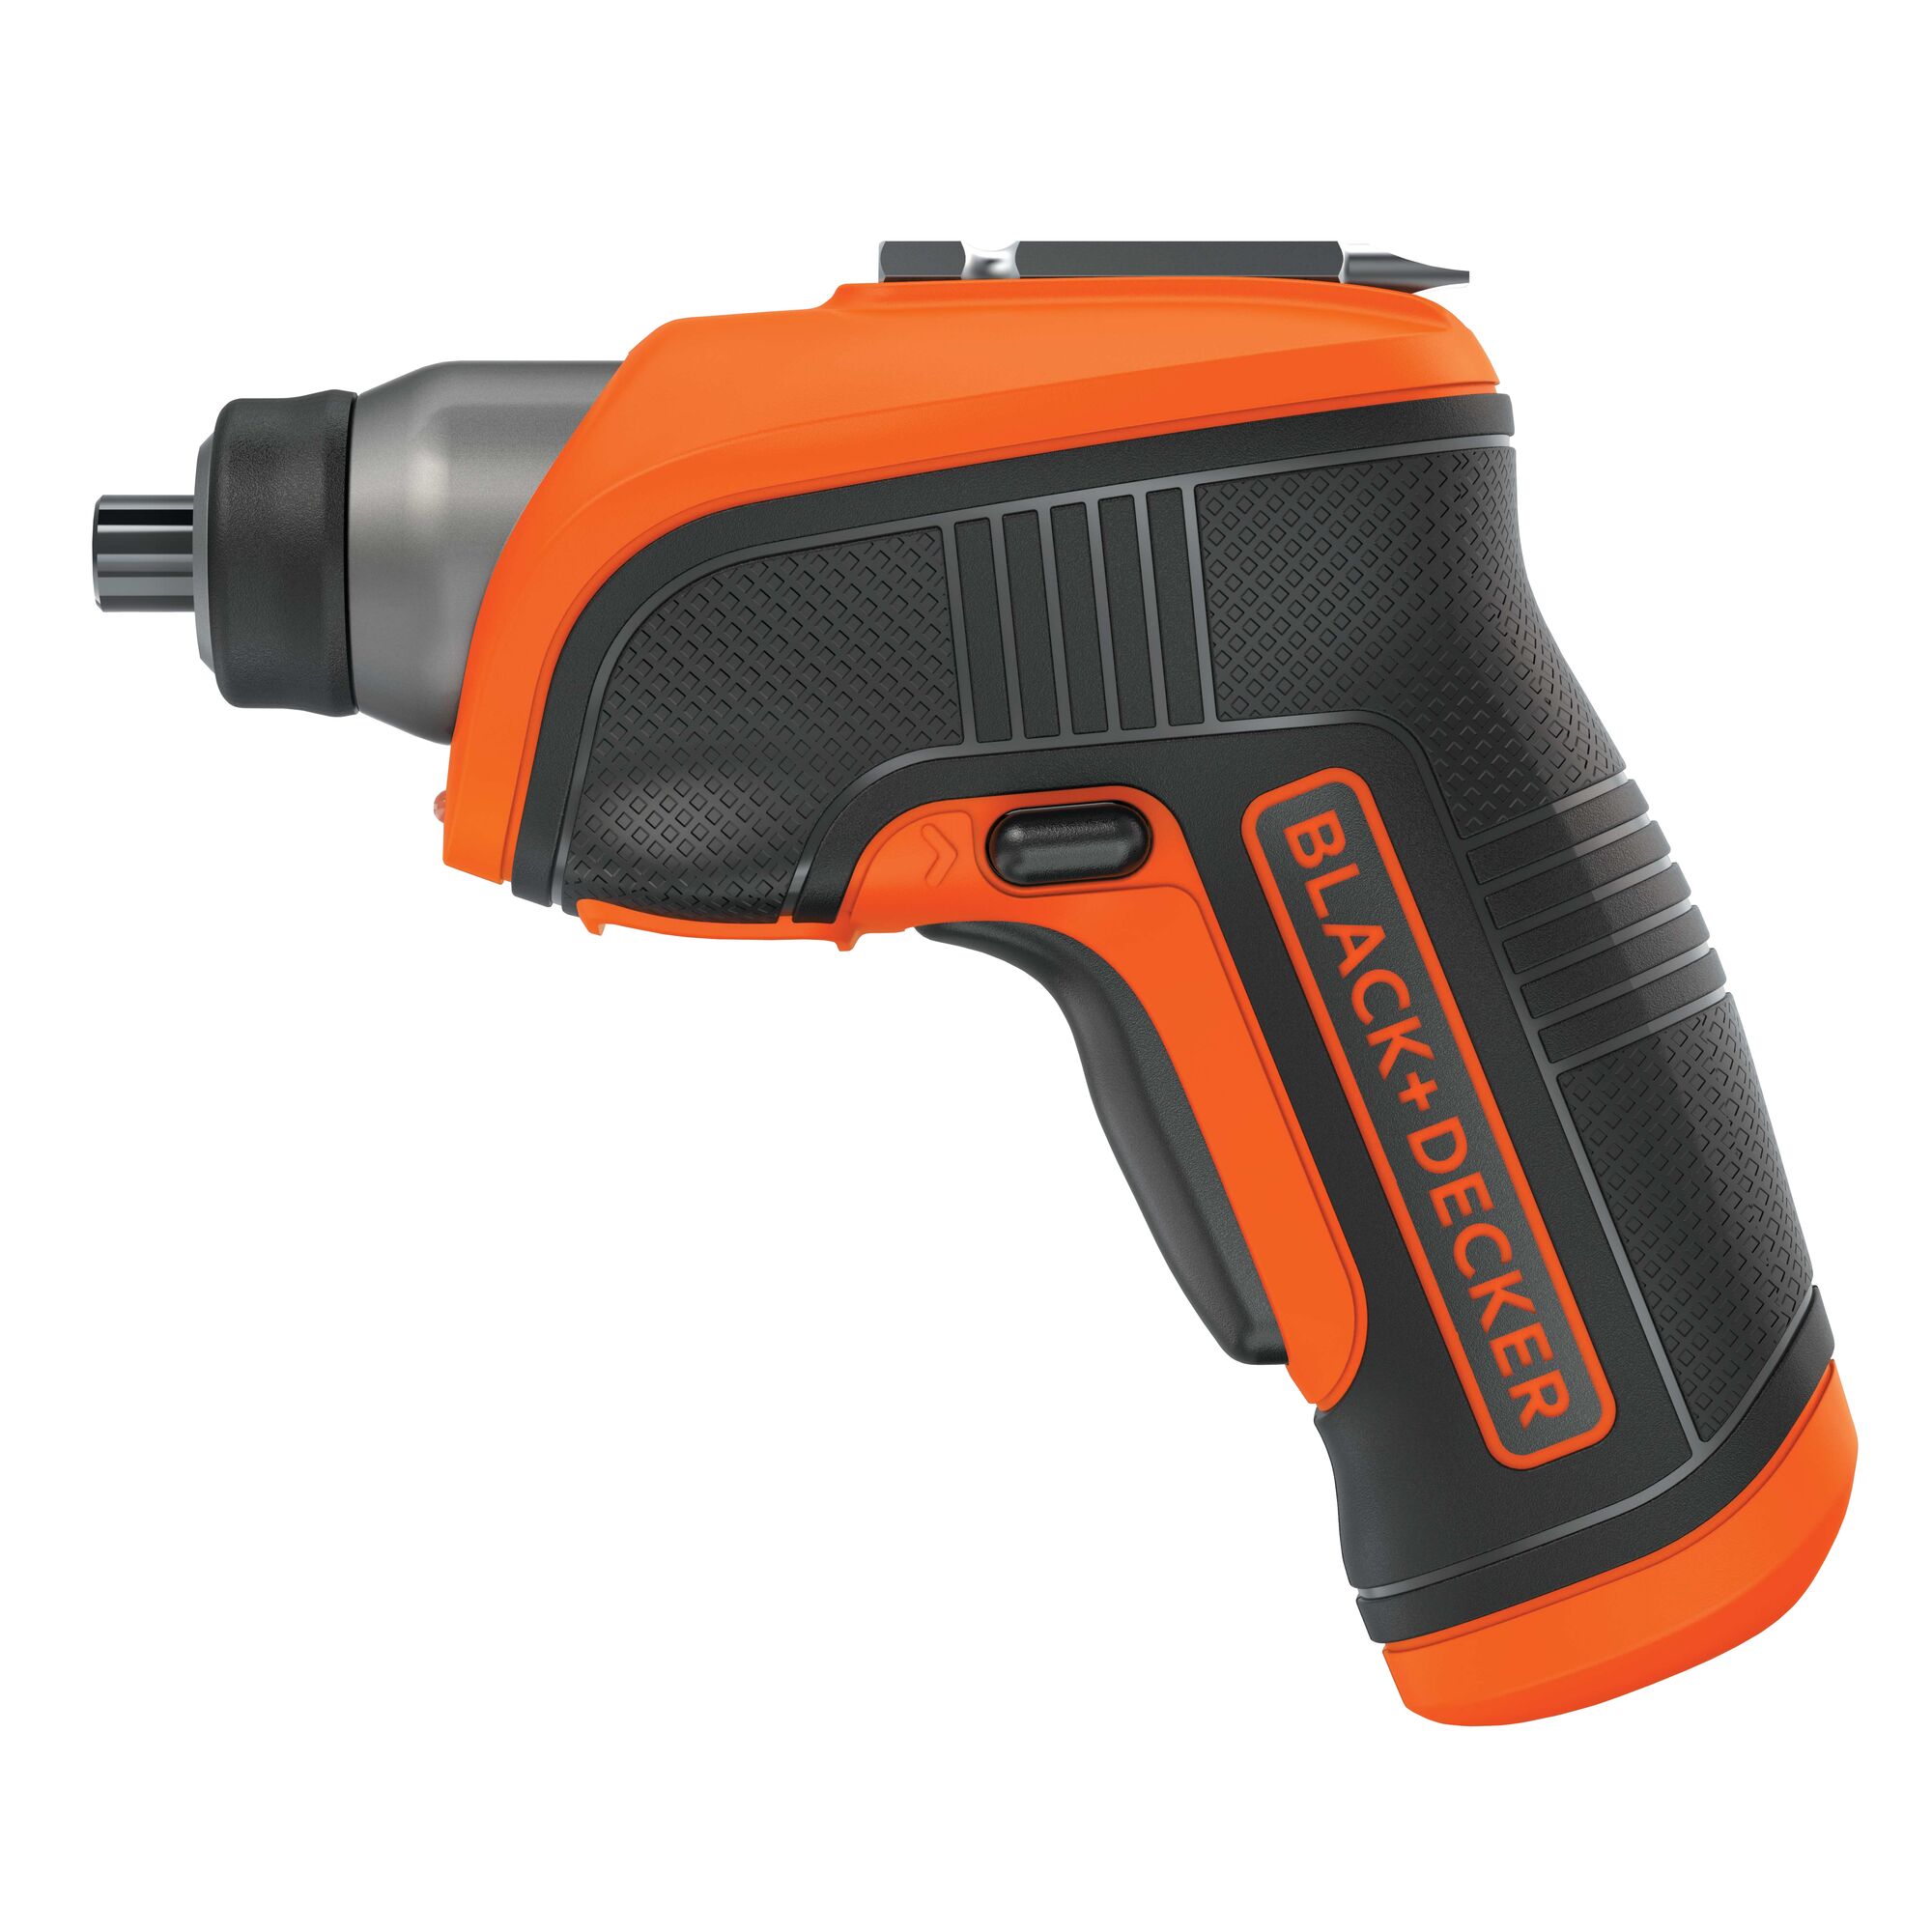 Profile of 4 volt MAX lithium rechargeable screwdriver